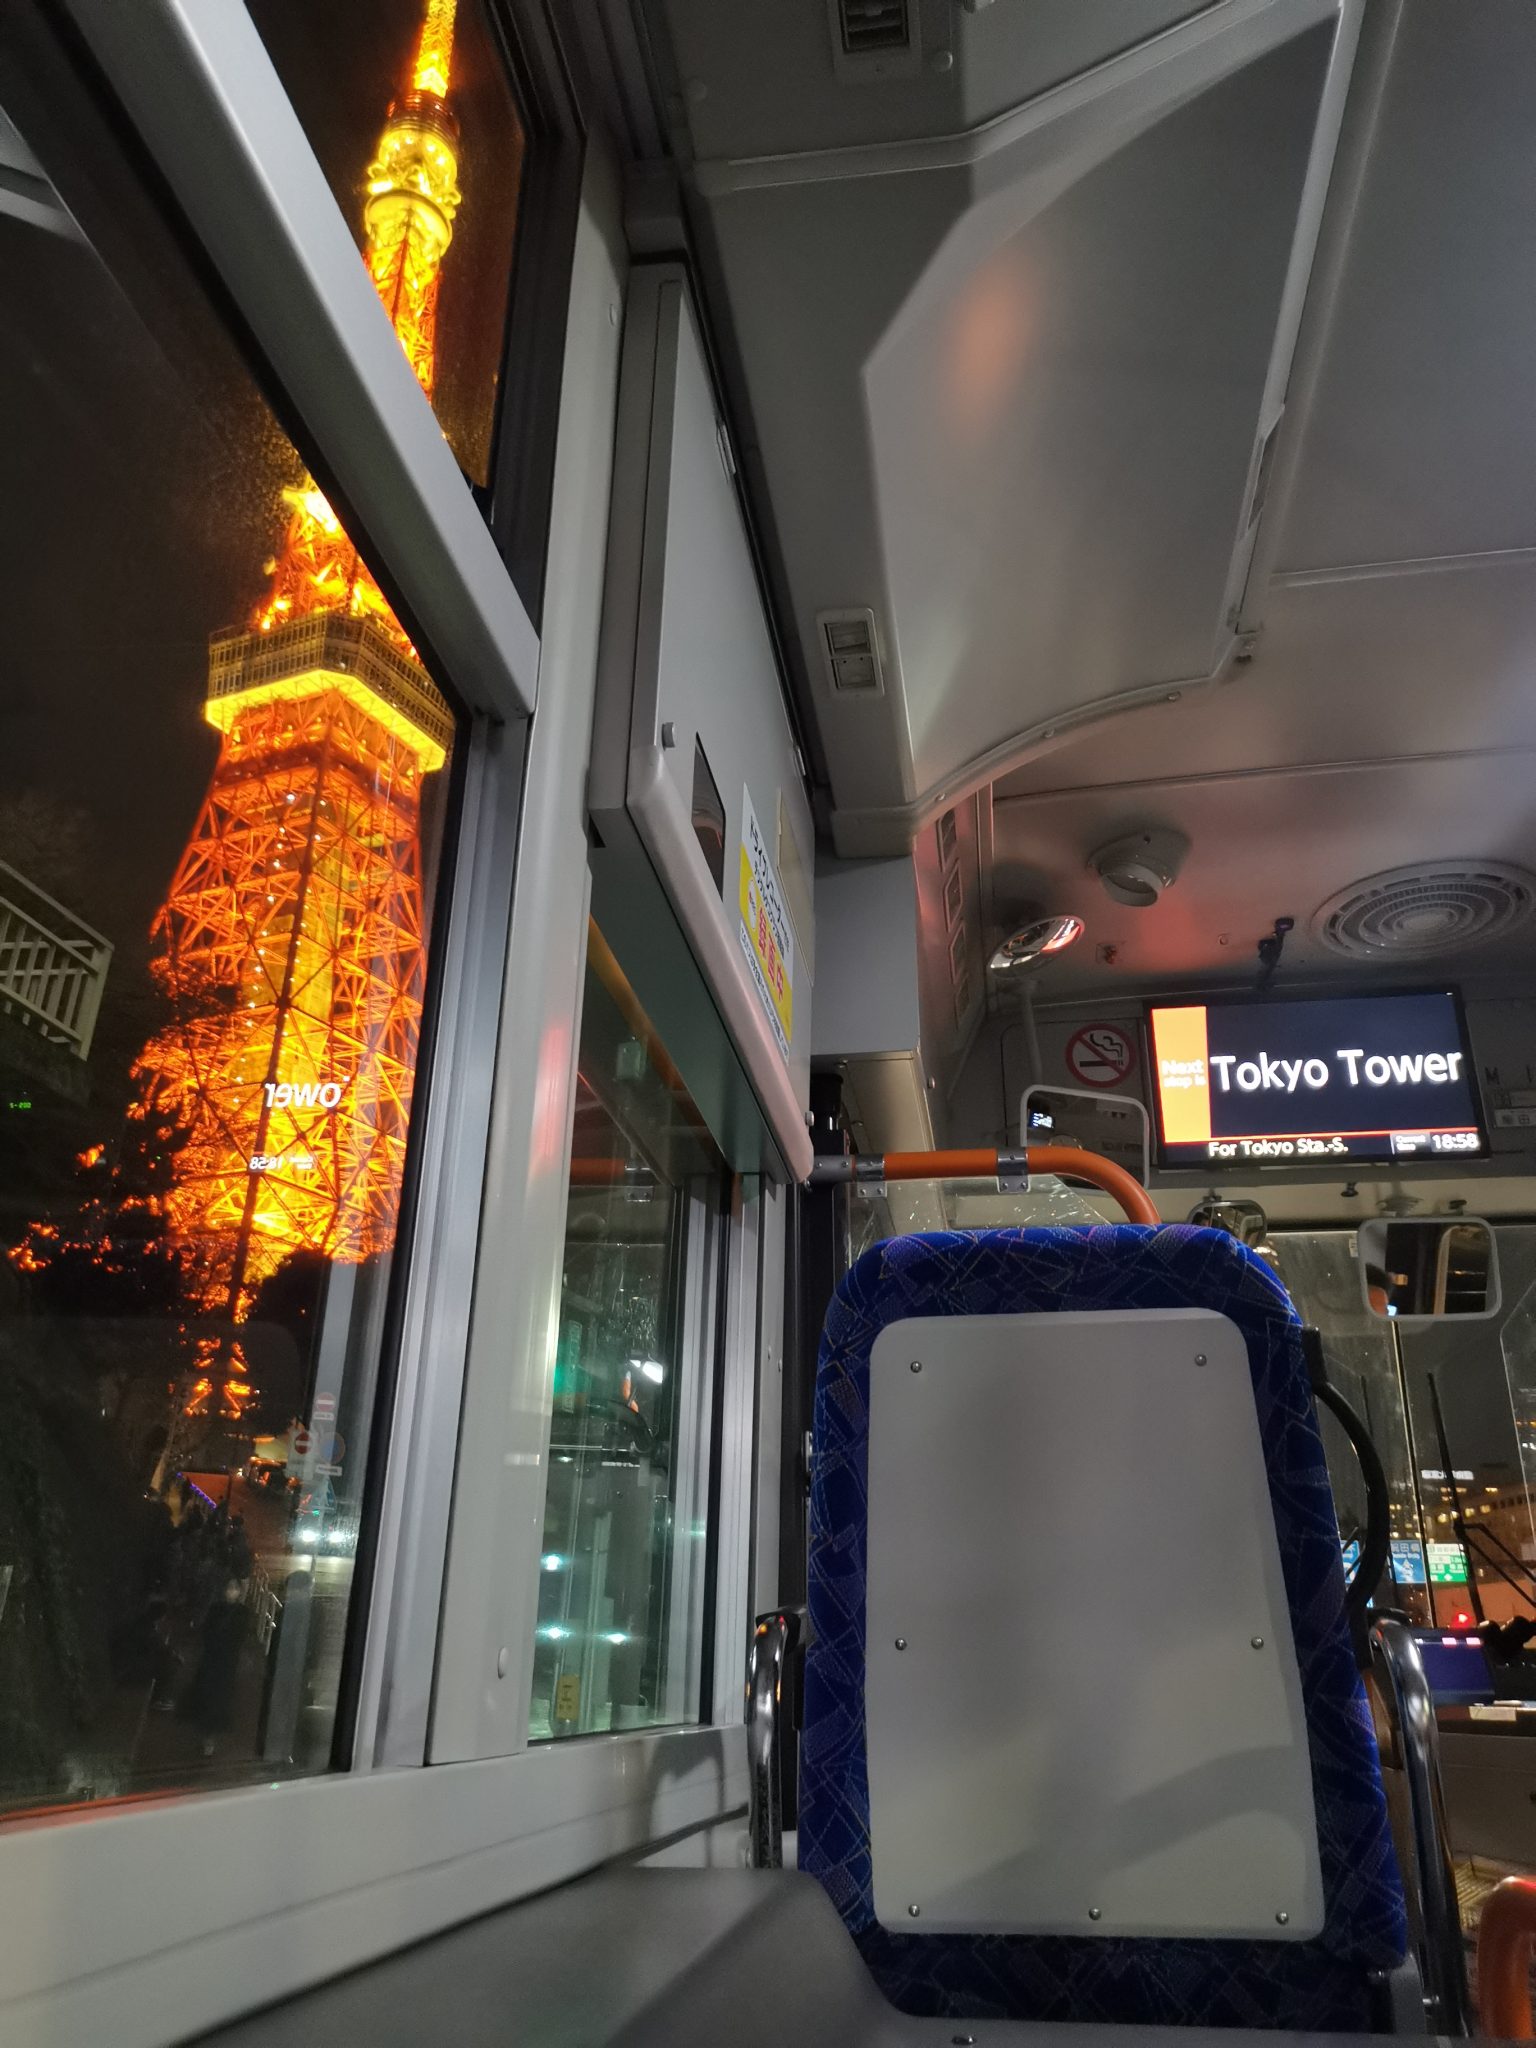 Tokyo Tower view from a local bus